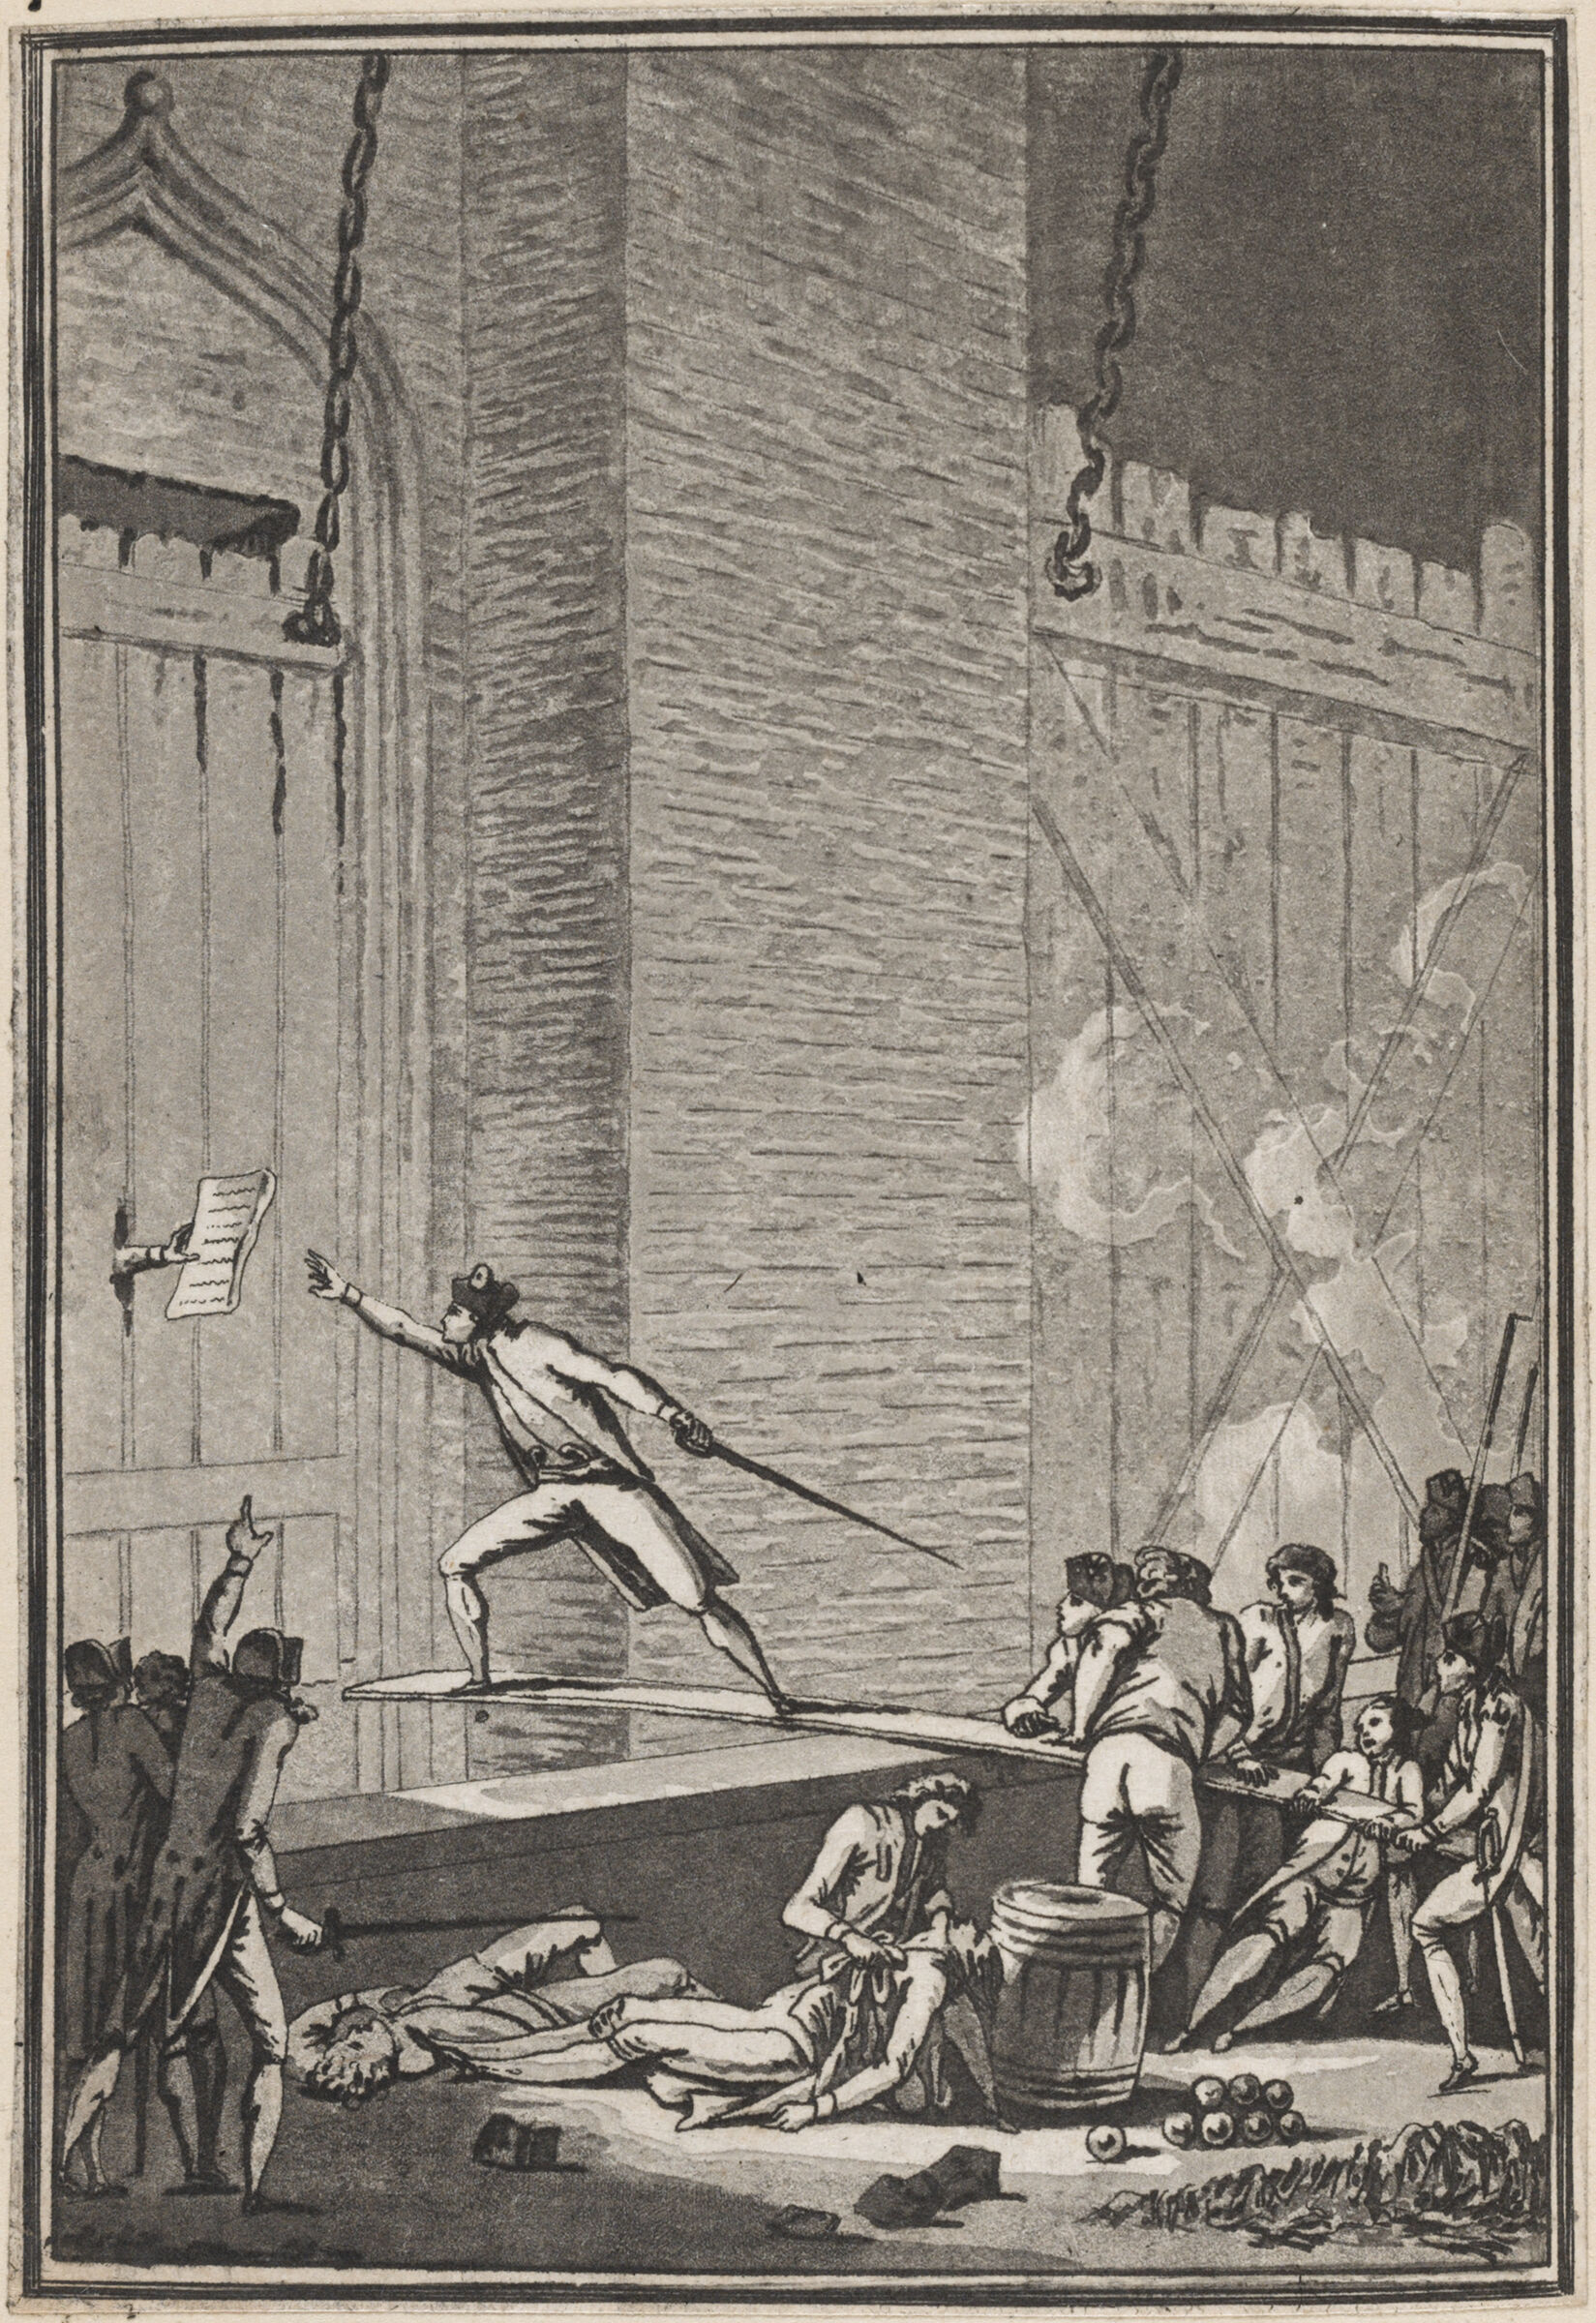 The Brave Maillard Reaches For The 'Propositions Des Assiégés' On A Plank Suspended Over The Moat Of The Bastille (14 July 1789)